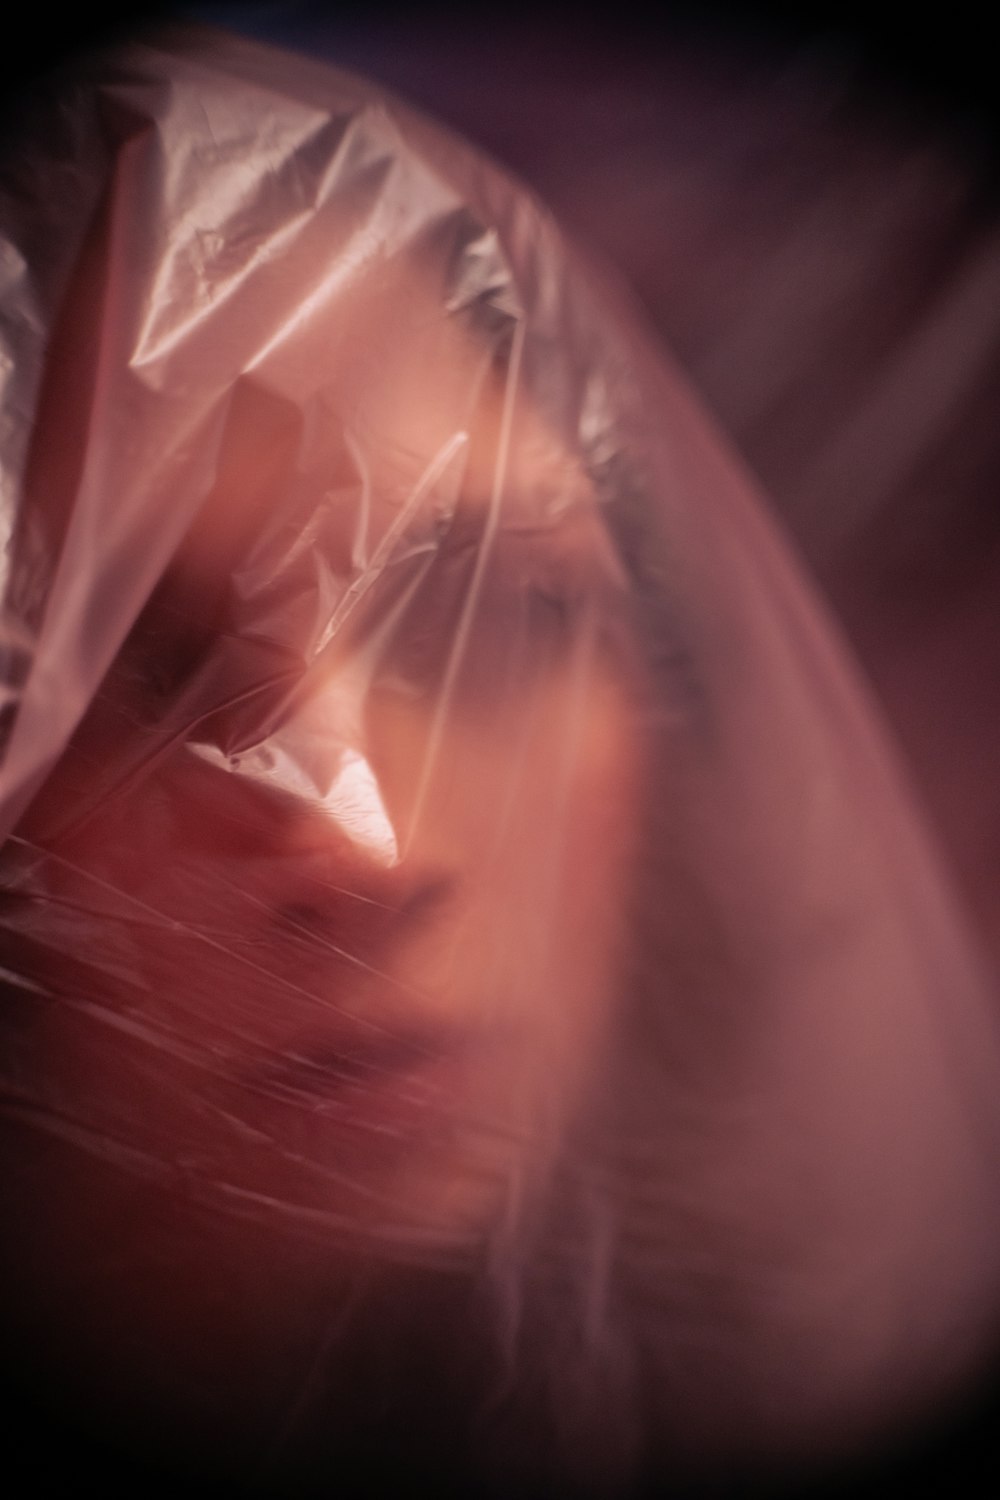 a blurry photo of a woman's face with a plastic covering her head